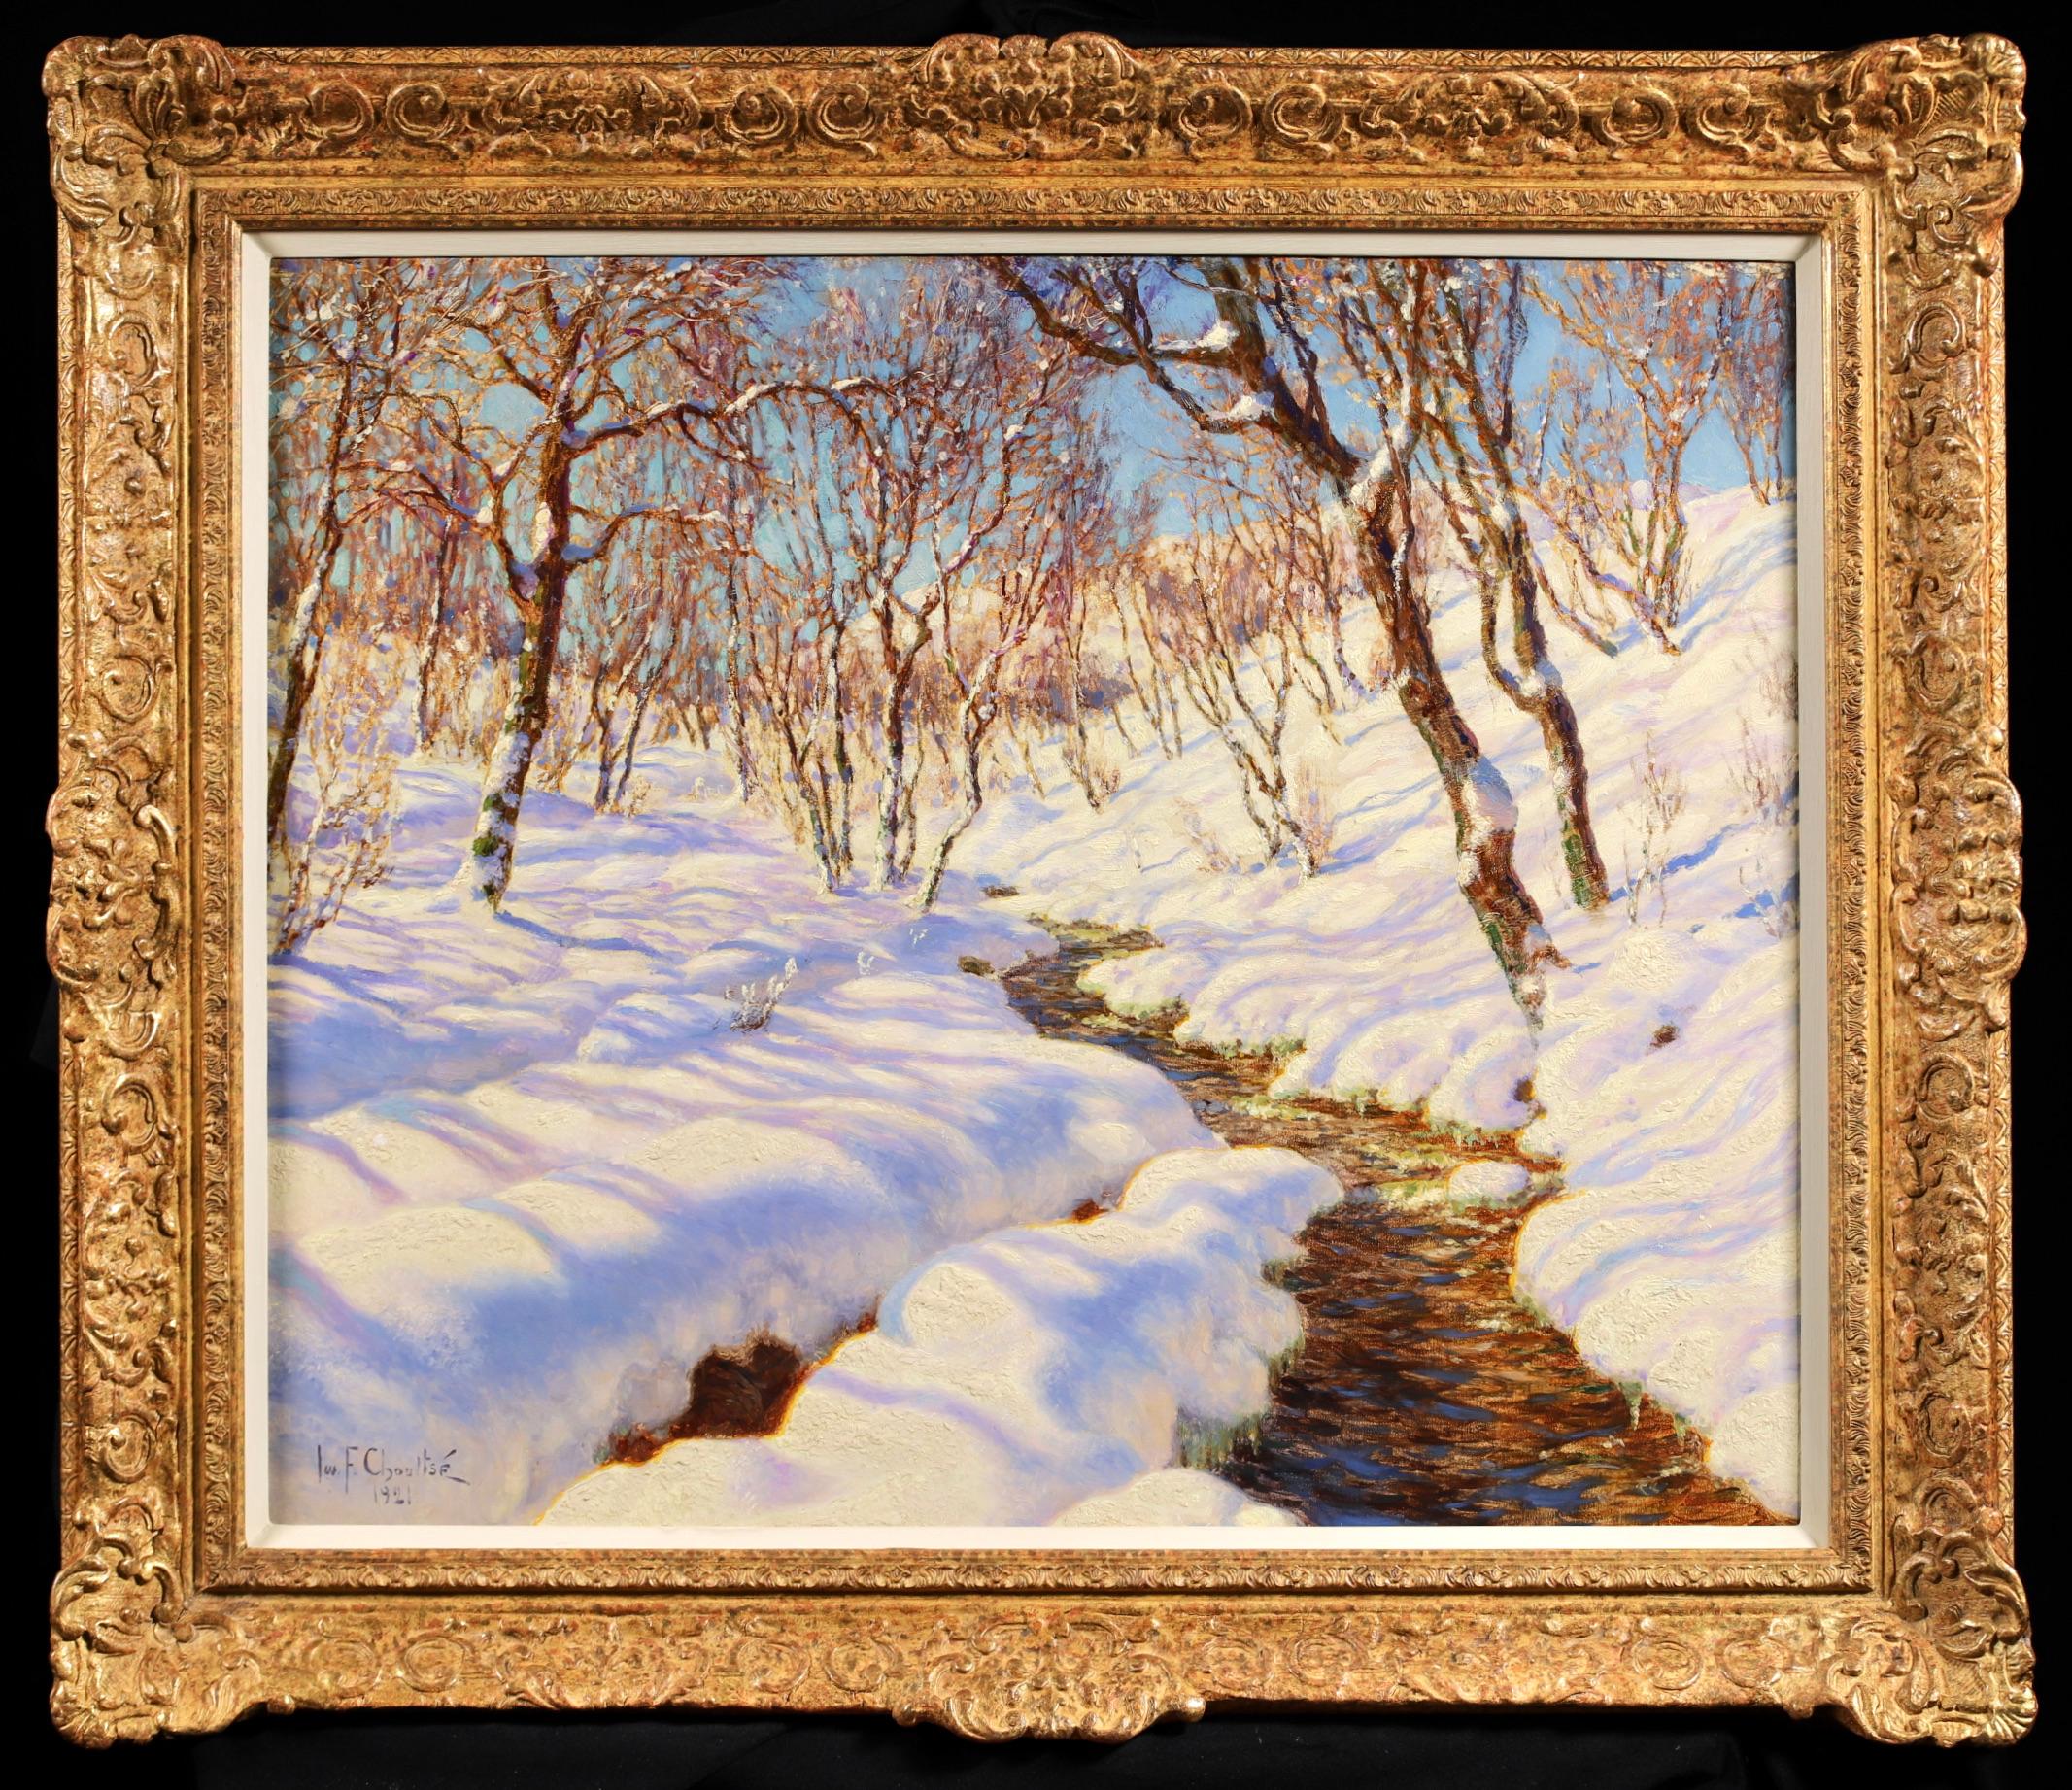 Ivan Fedorovich Choultsé Landscape Painting - Winter Sunlight - Realist Landscape Oil Painting by Ivan Fedorovich Choultse